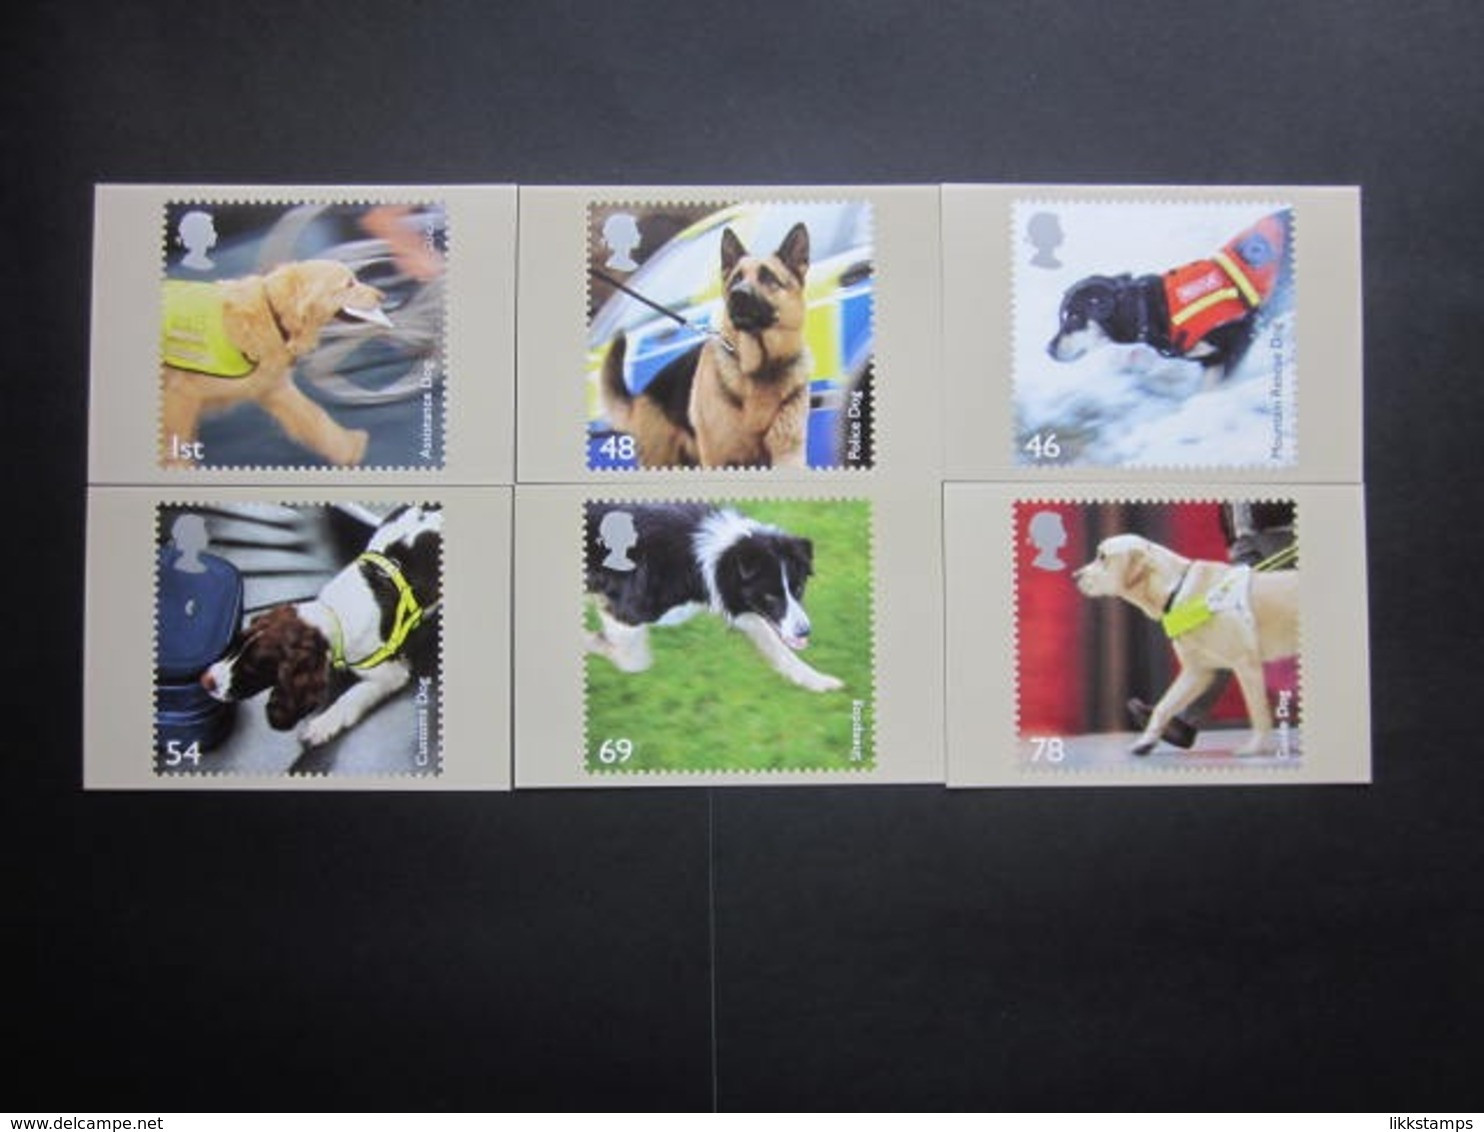 2008 WORKING DOGS P.H.Q. CARDS UNUSED, ISSUE No. 307 #00749 - PHQ Cards